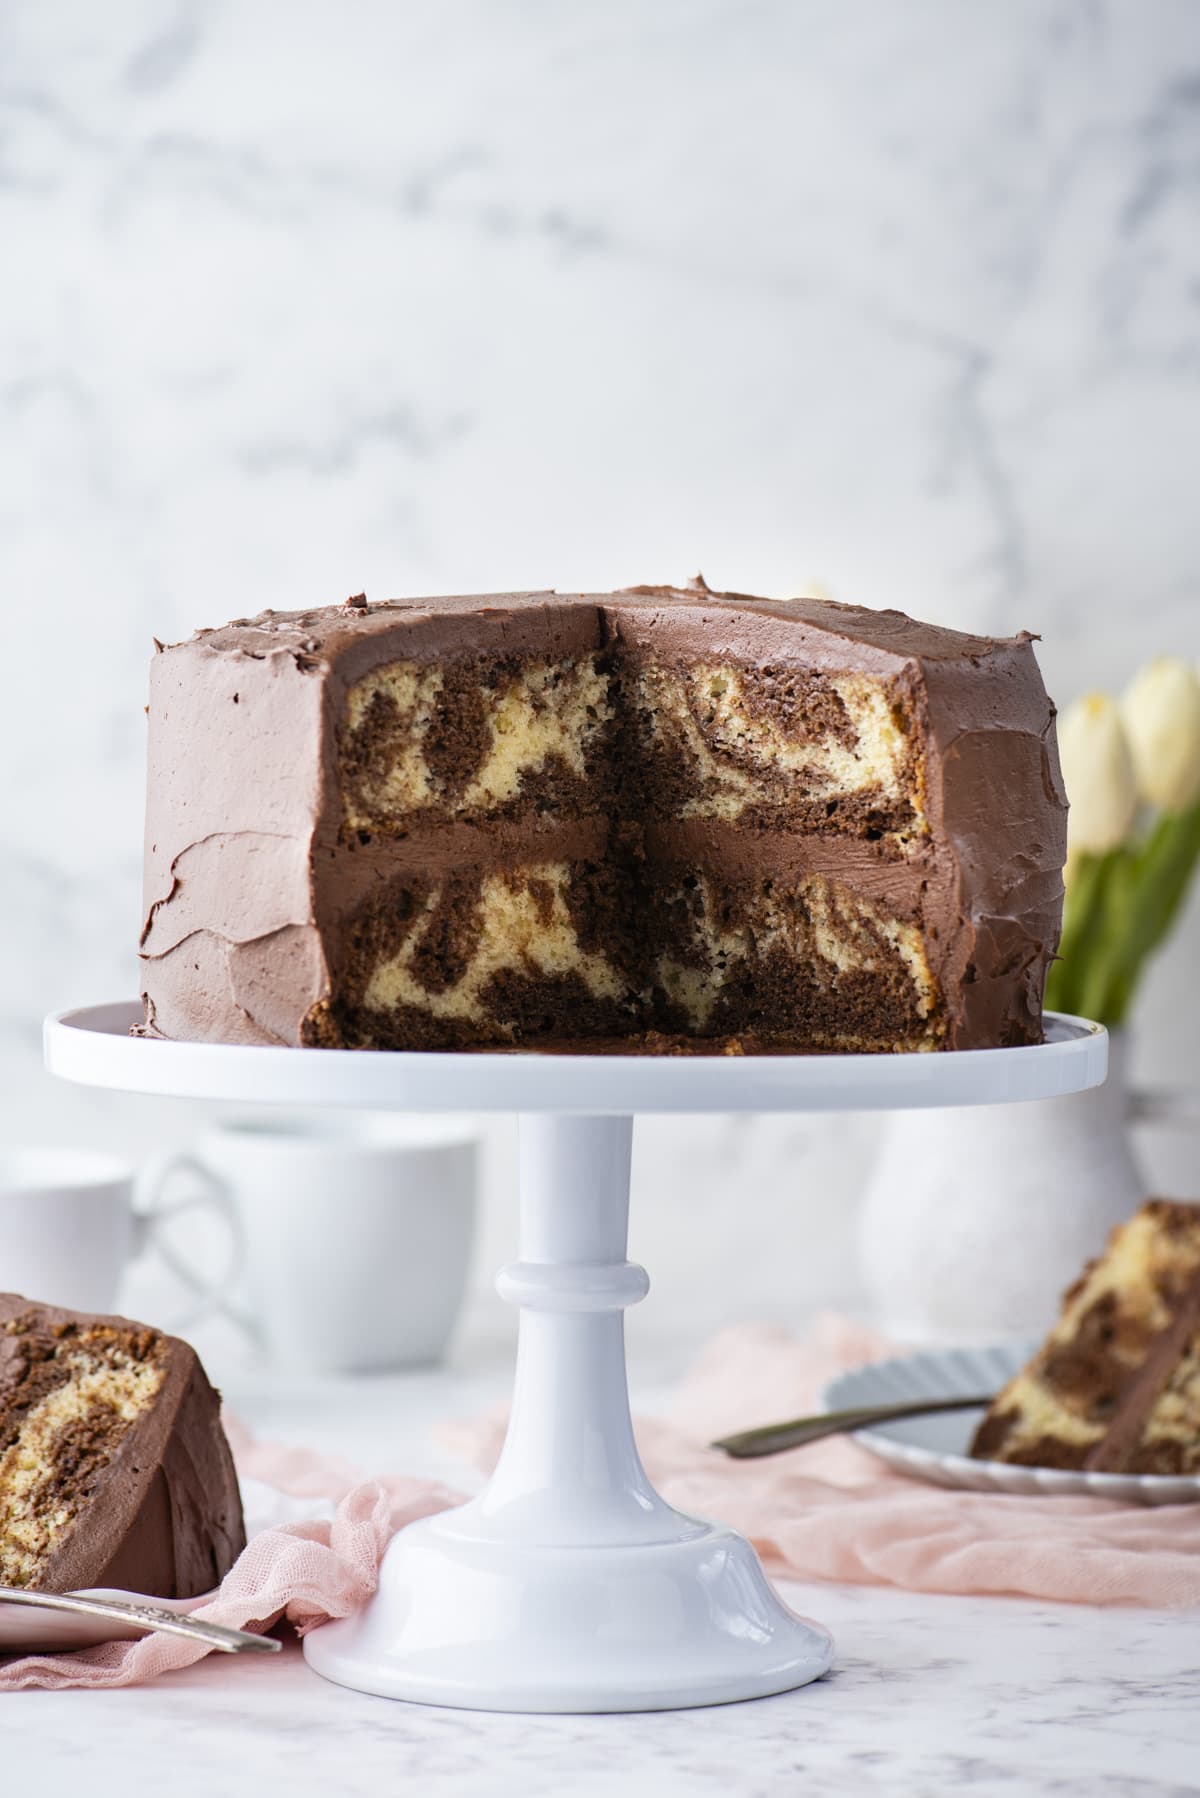 a two layer swirl cake with chocolate frosting on a white cake stand with two slices missing that are sitting on small plates with forks on a light pink cloth near the cake stand